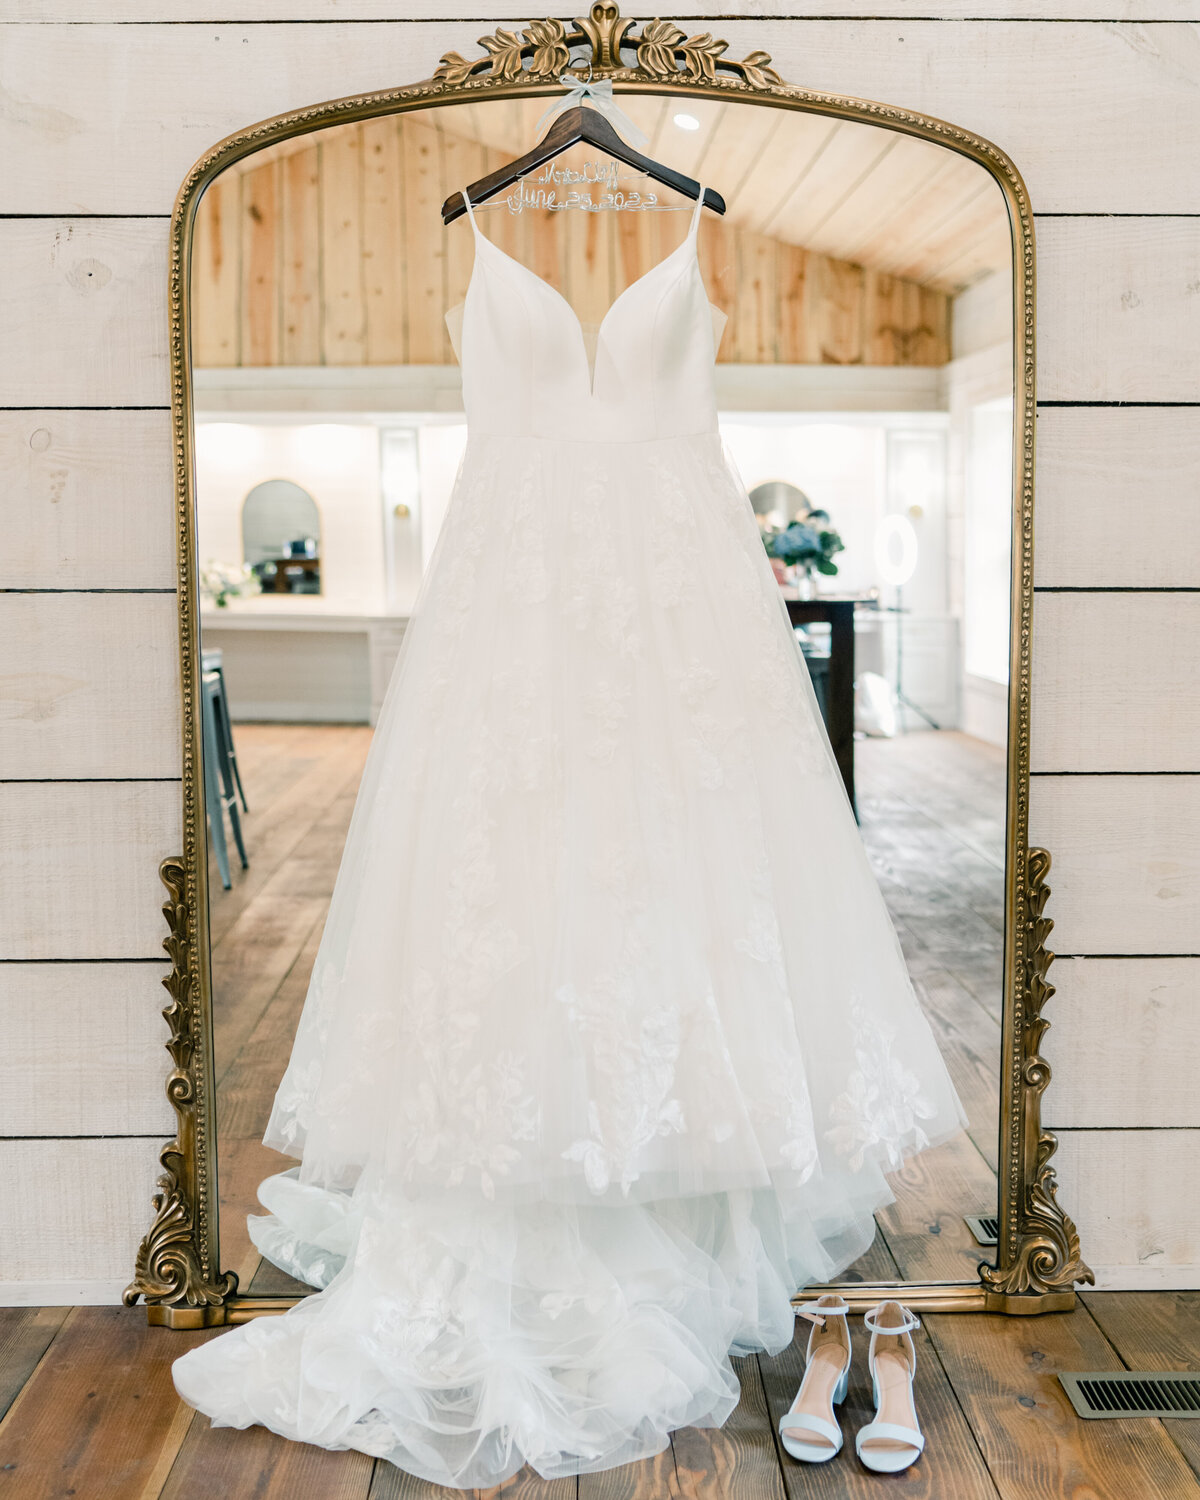 Dress hanging from mirror at bridal suite iat Koury Farms Wedding Venue in North Georgia